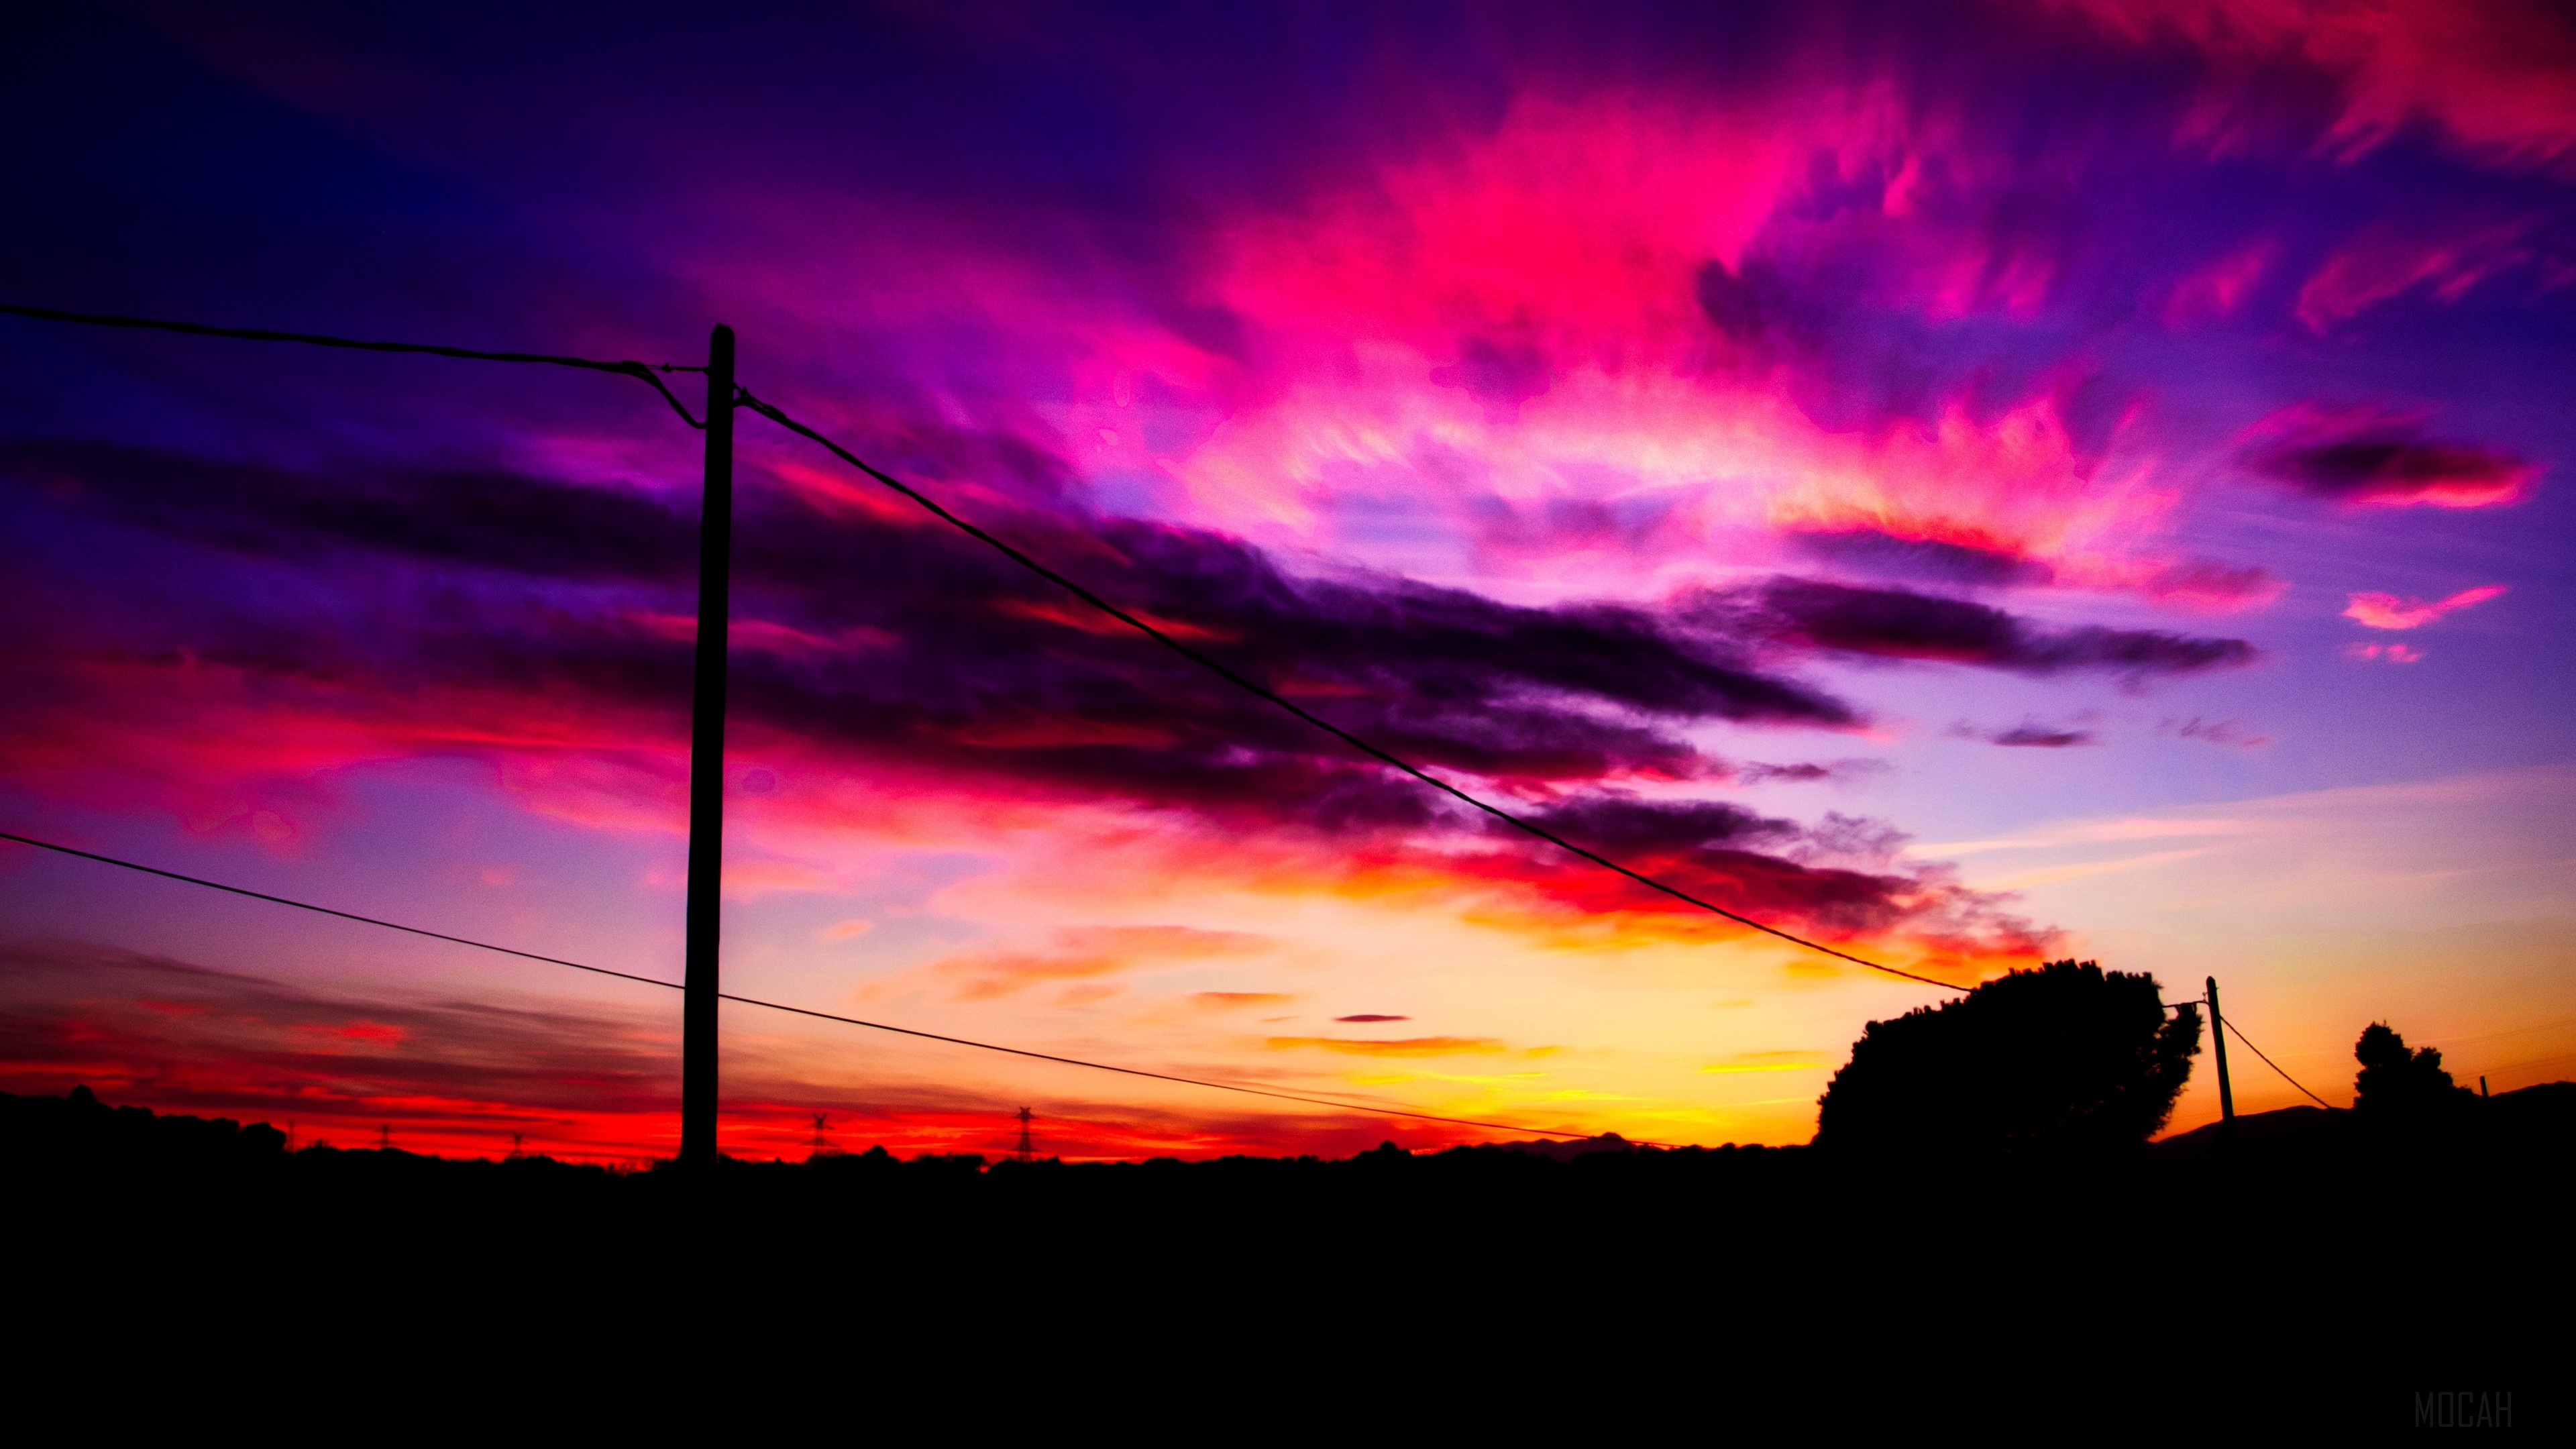 post, wires, sunset, sky, clouds 4k Gallery HD Wallpaper